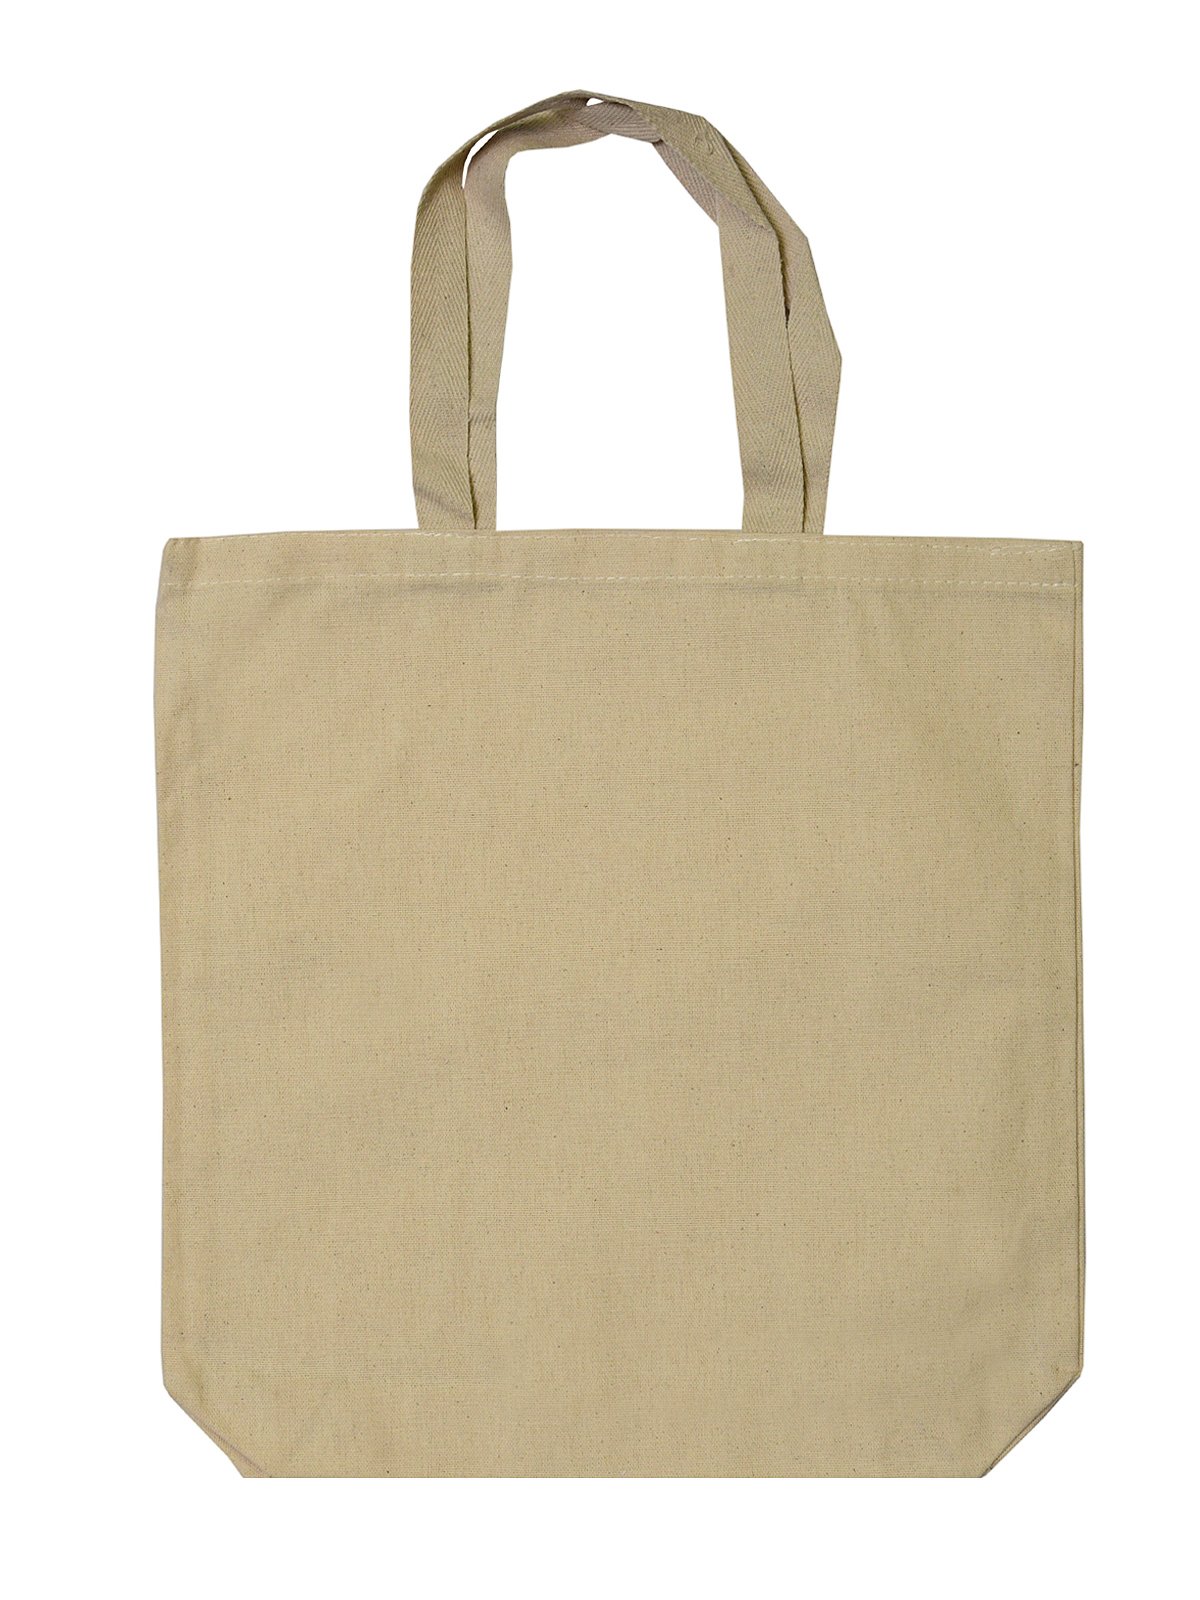 Wholesale TOTE BAG WITH FOLDED BOTTOM GUSSET - Living Fashions